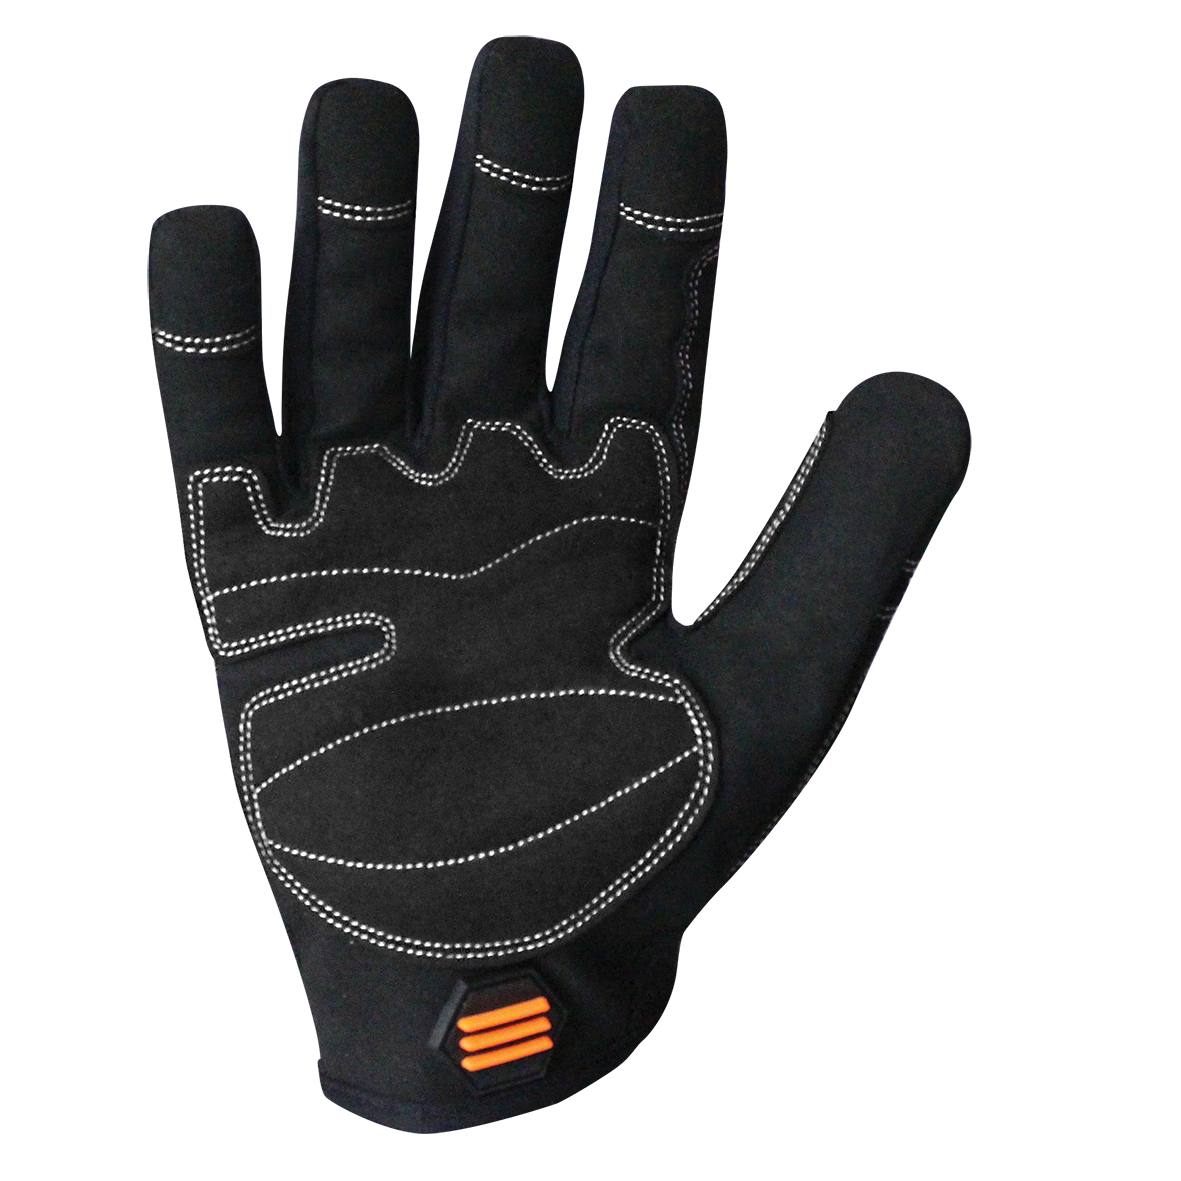 Armour Safety Products Pty Ltd. - Duty Utility Worker Glove